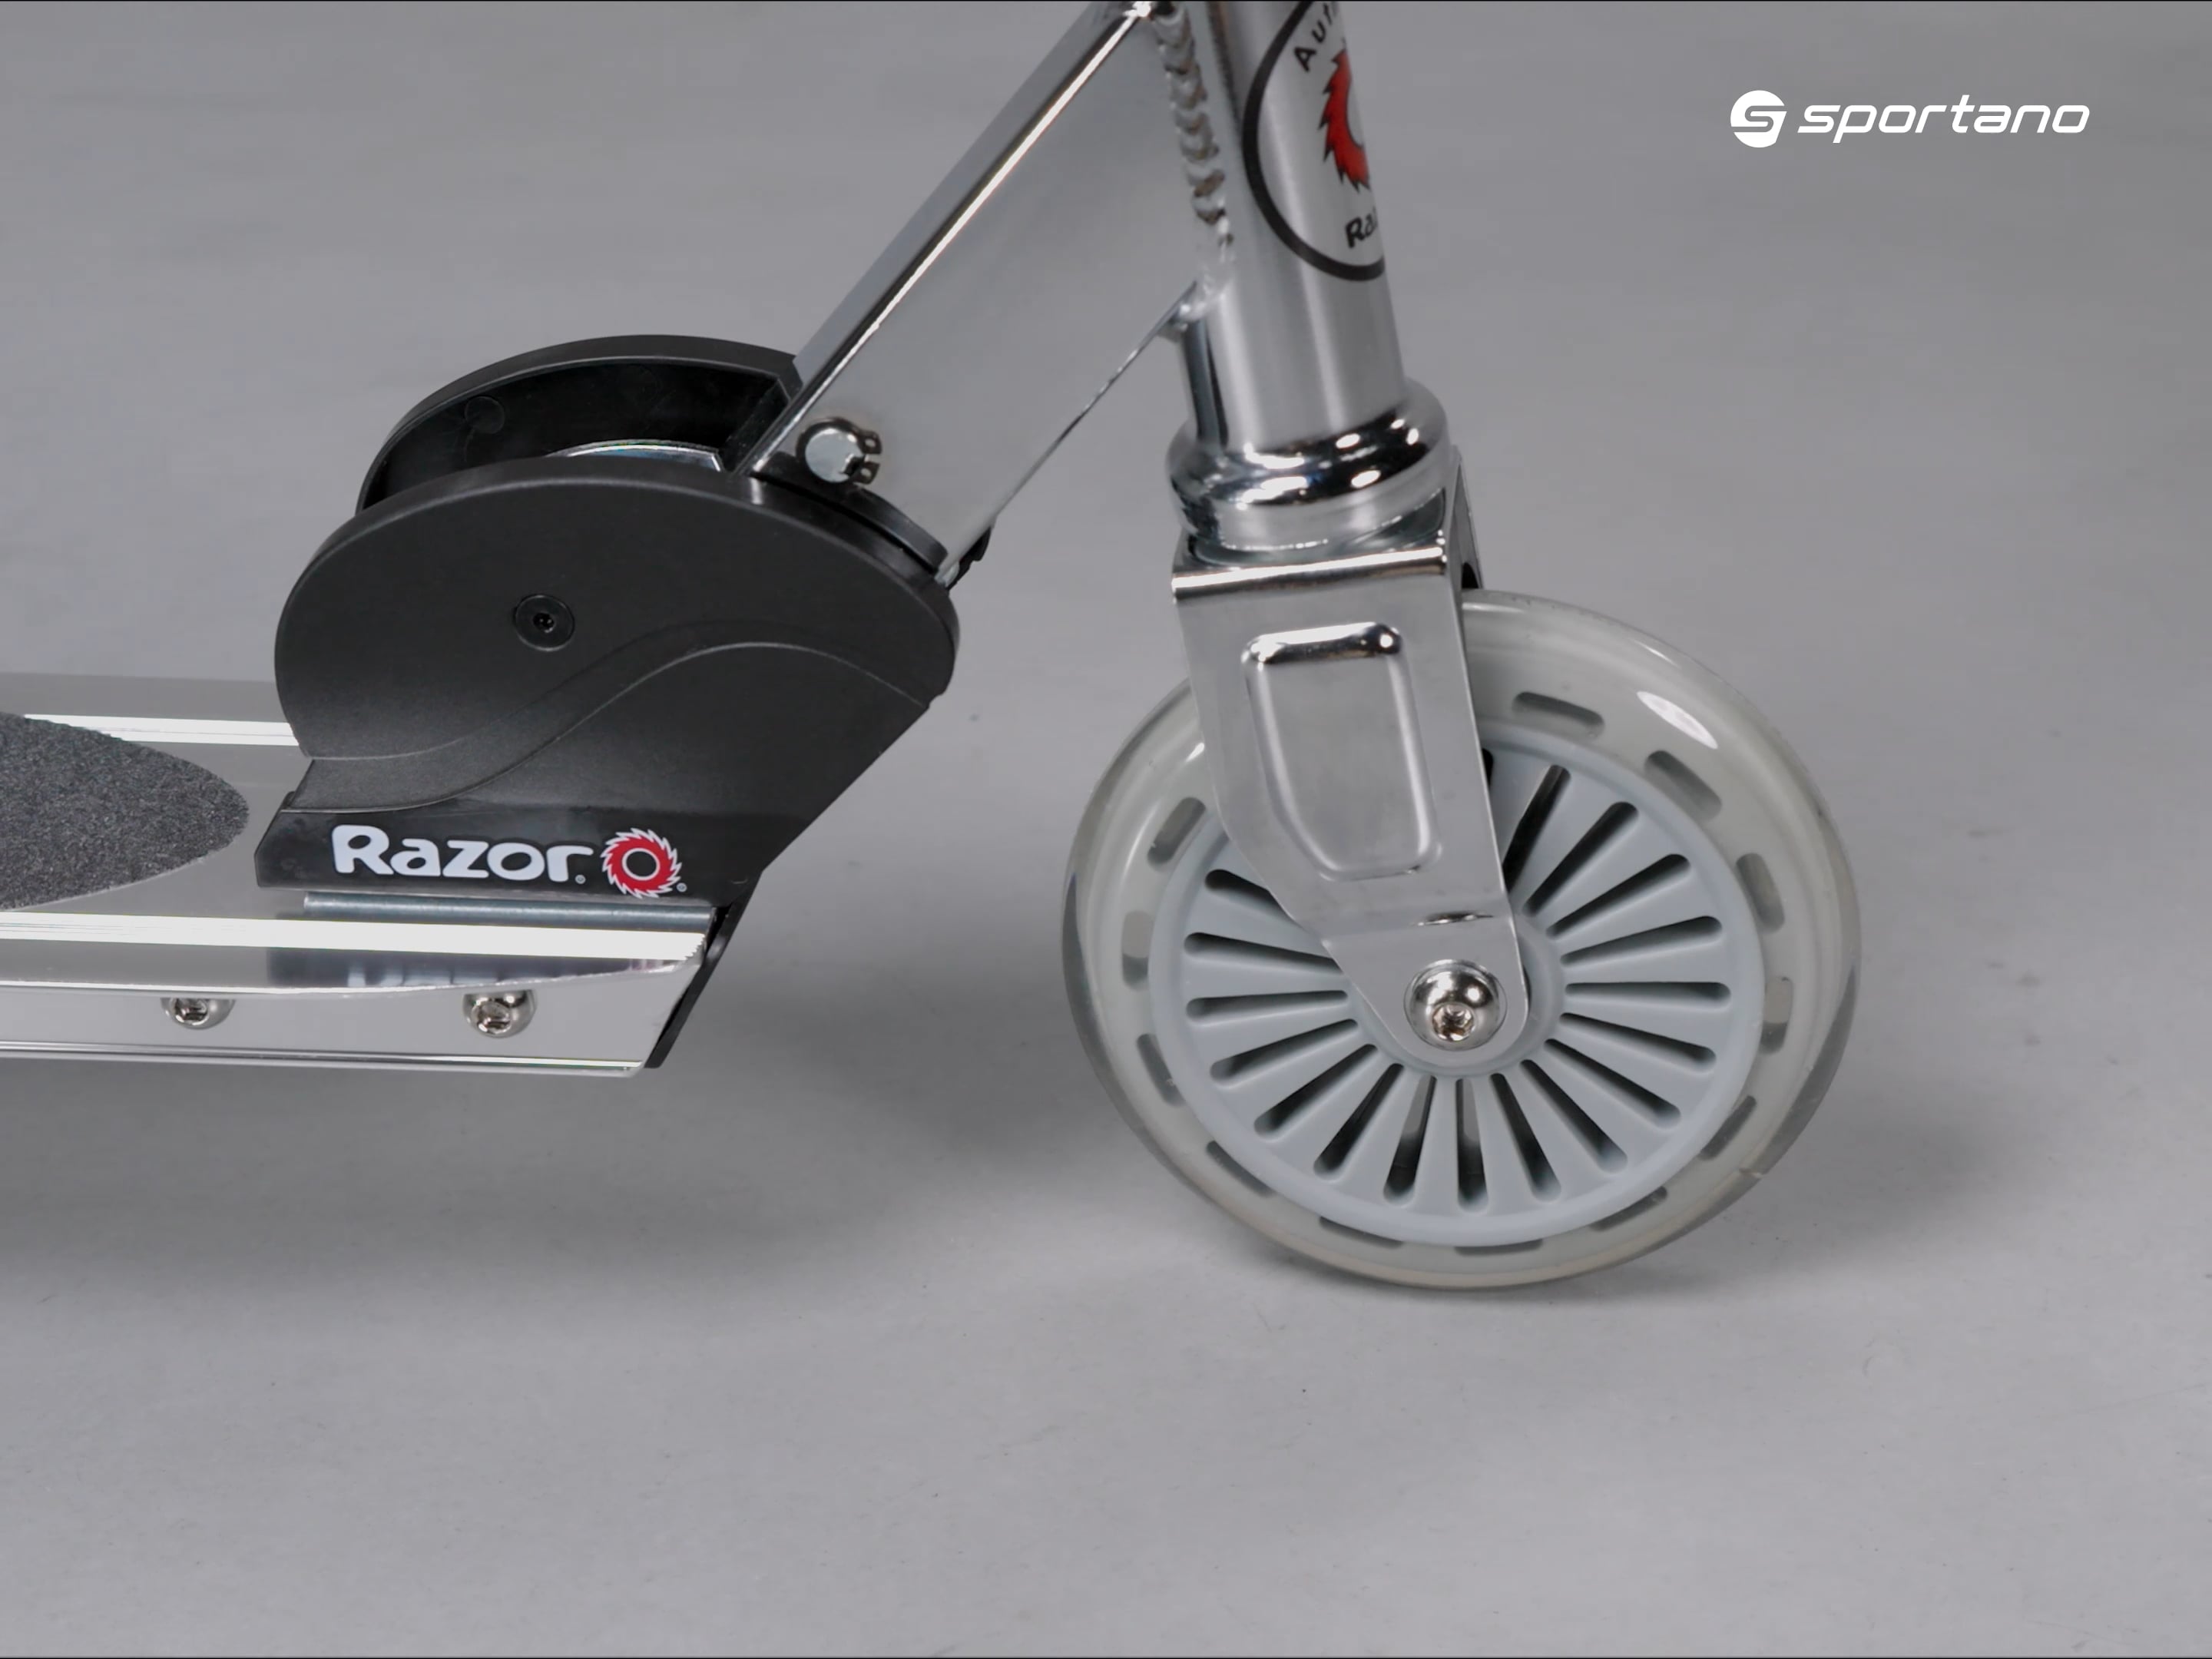 Razor A125 Scooter children's scooter silver 13072207